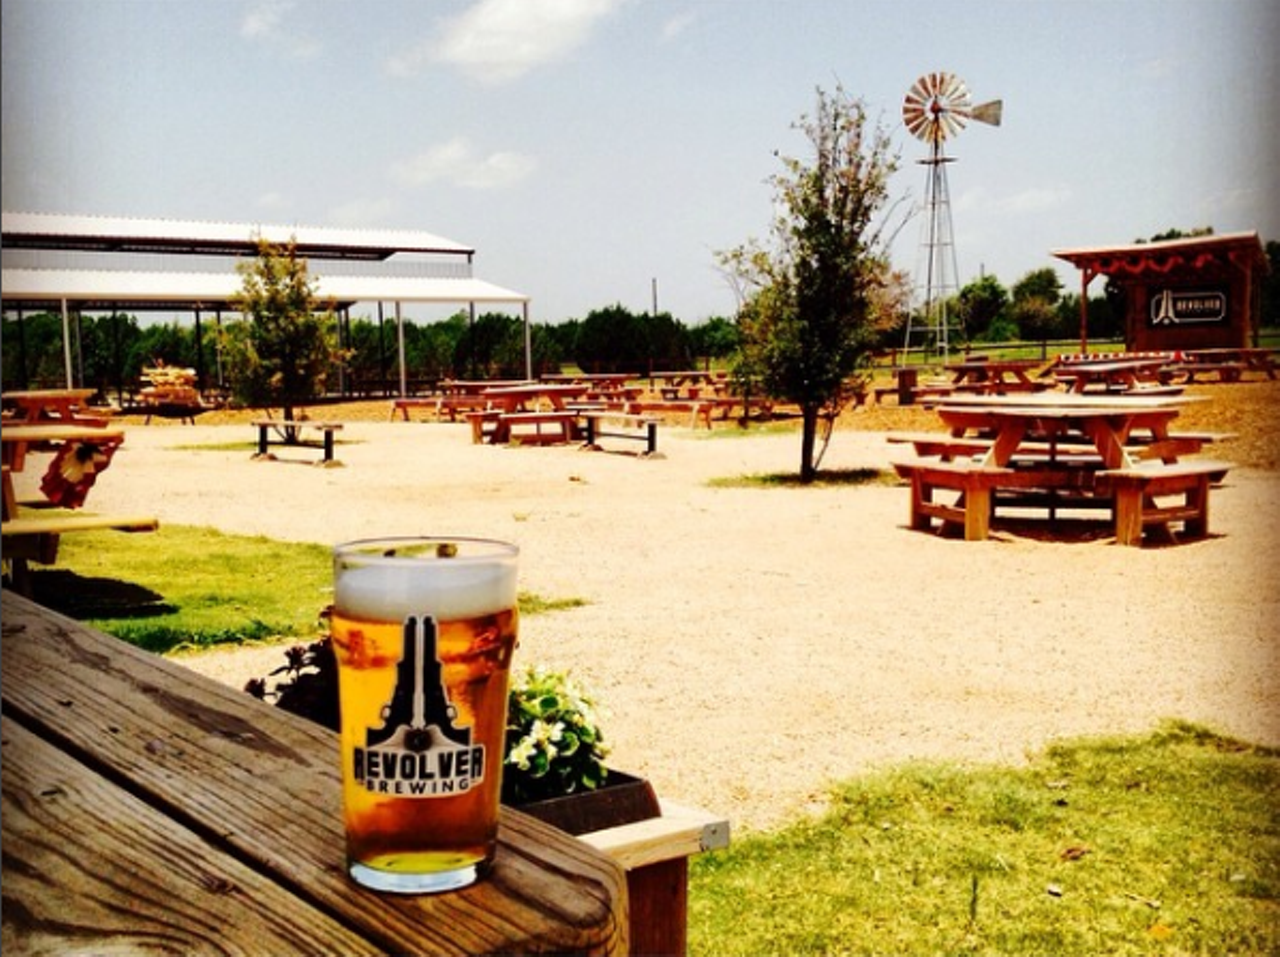 Revolver Brewing
5600 Matlock Road, Granbury, TX, (817) 736-8034, revolverbrewing.com 
This brewery offers tours, food and even live music. All that is required of you is a valid ID and a yearnin' for some learnin'. Or drinkin'. 
Photo via Instagram, revolverbrewing